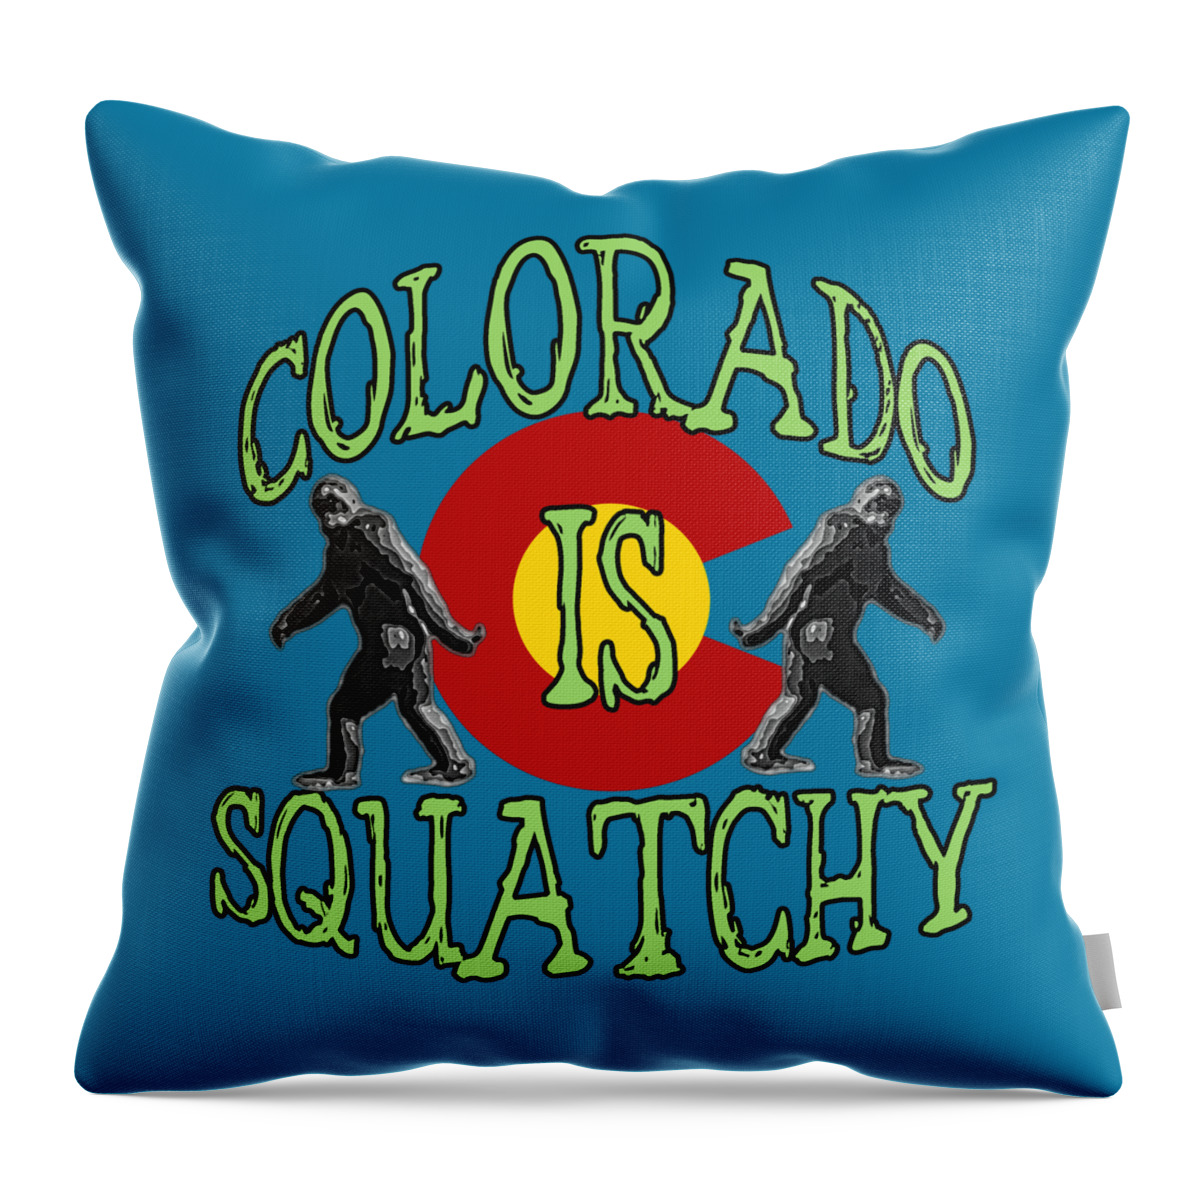 Colorado Throw Pillow featuring the digital art Colorado Is Squatchy by David G Paul